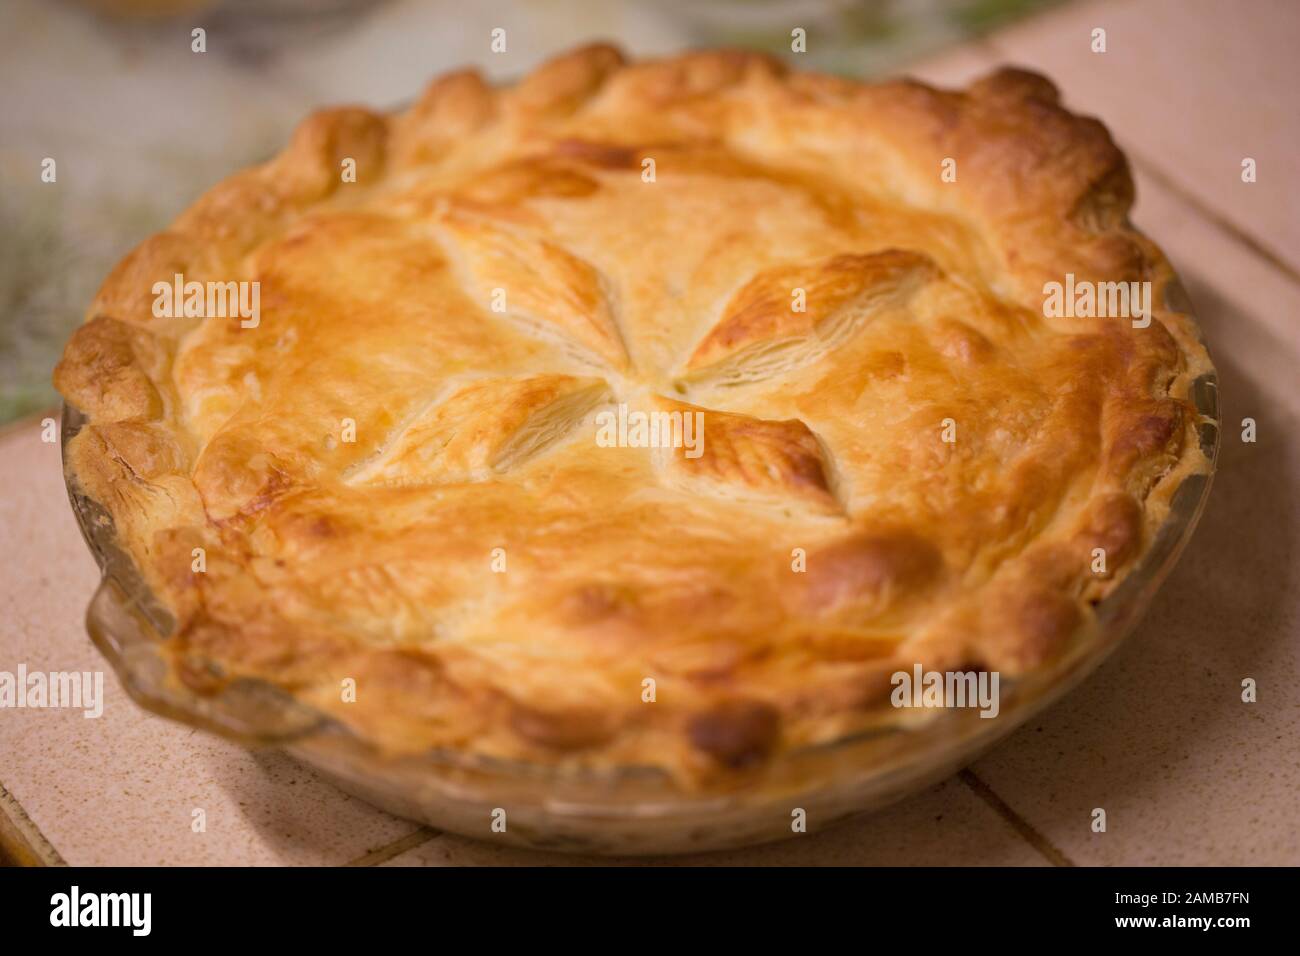 A homemade turkey pie made from leftovers from a Christmas turkey dinner. Lancashire north west England UK GB. Stock Photo